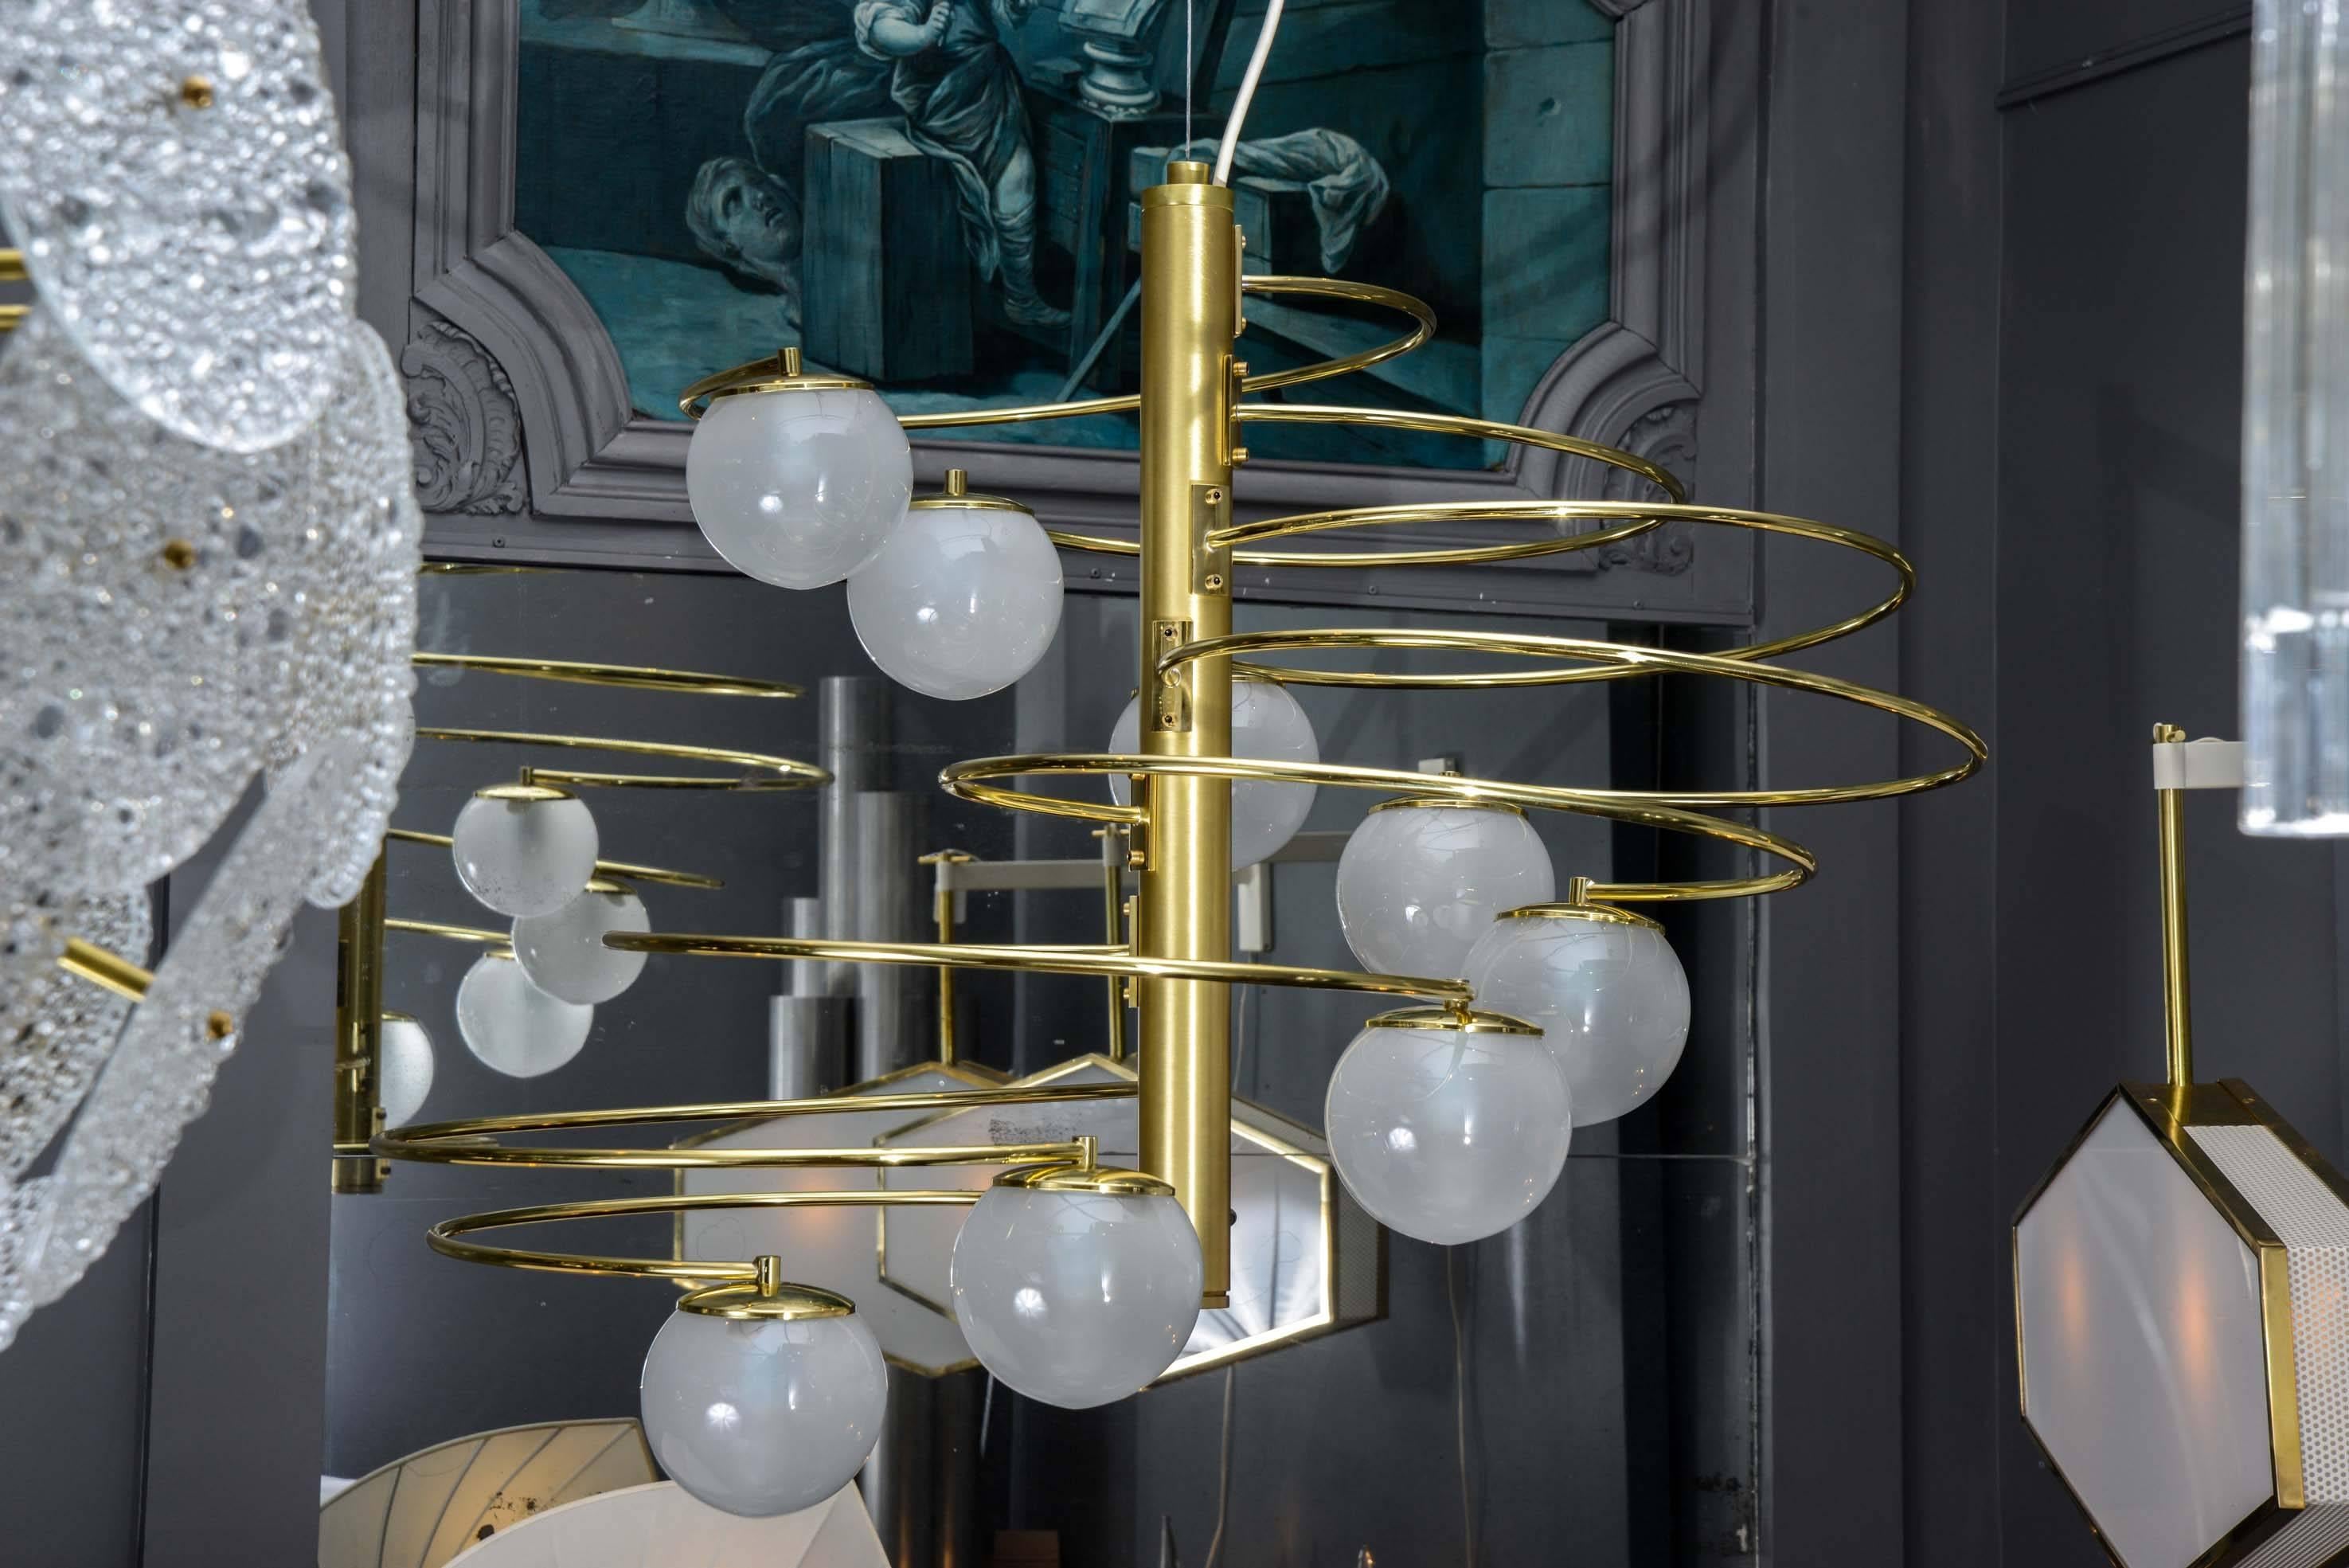 Very nice spiral chandelier original reference 1050 by Lumi.

Brass central stem and height curved arms holding small glass globes.